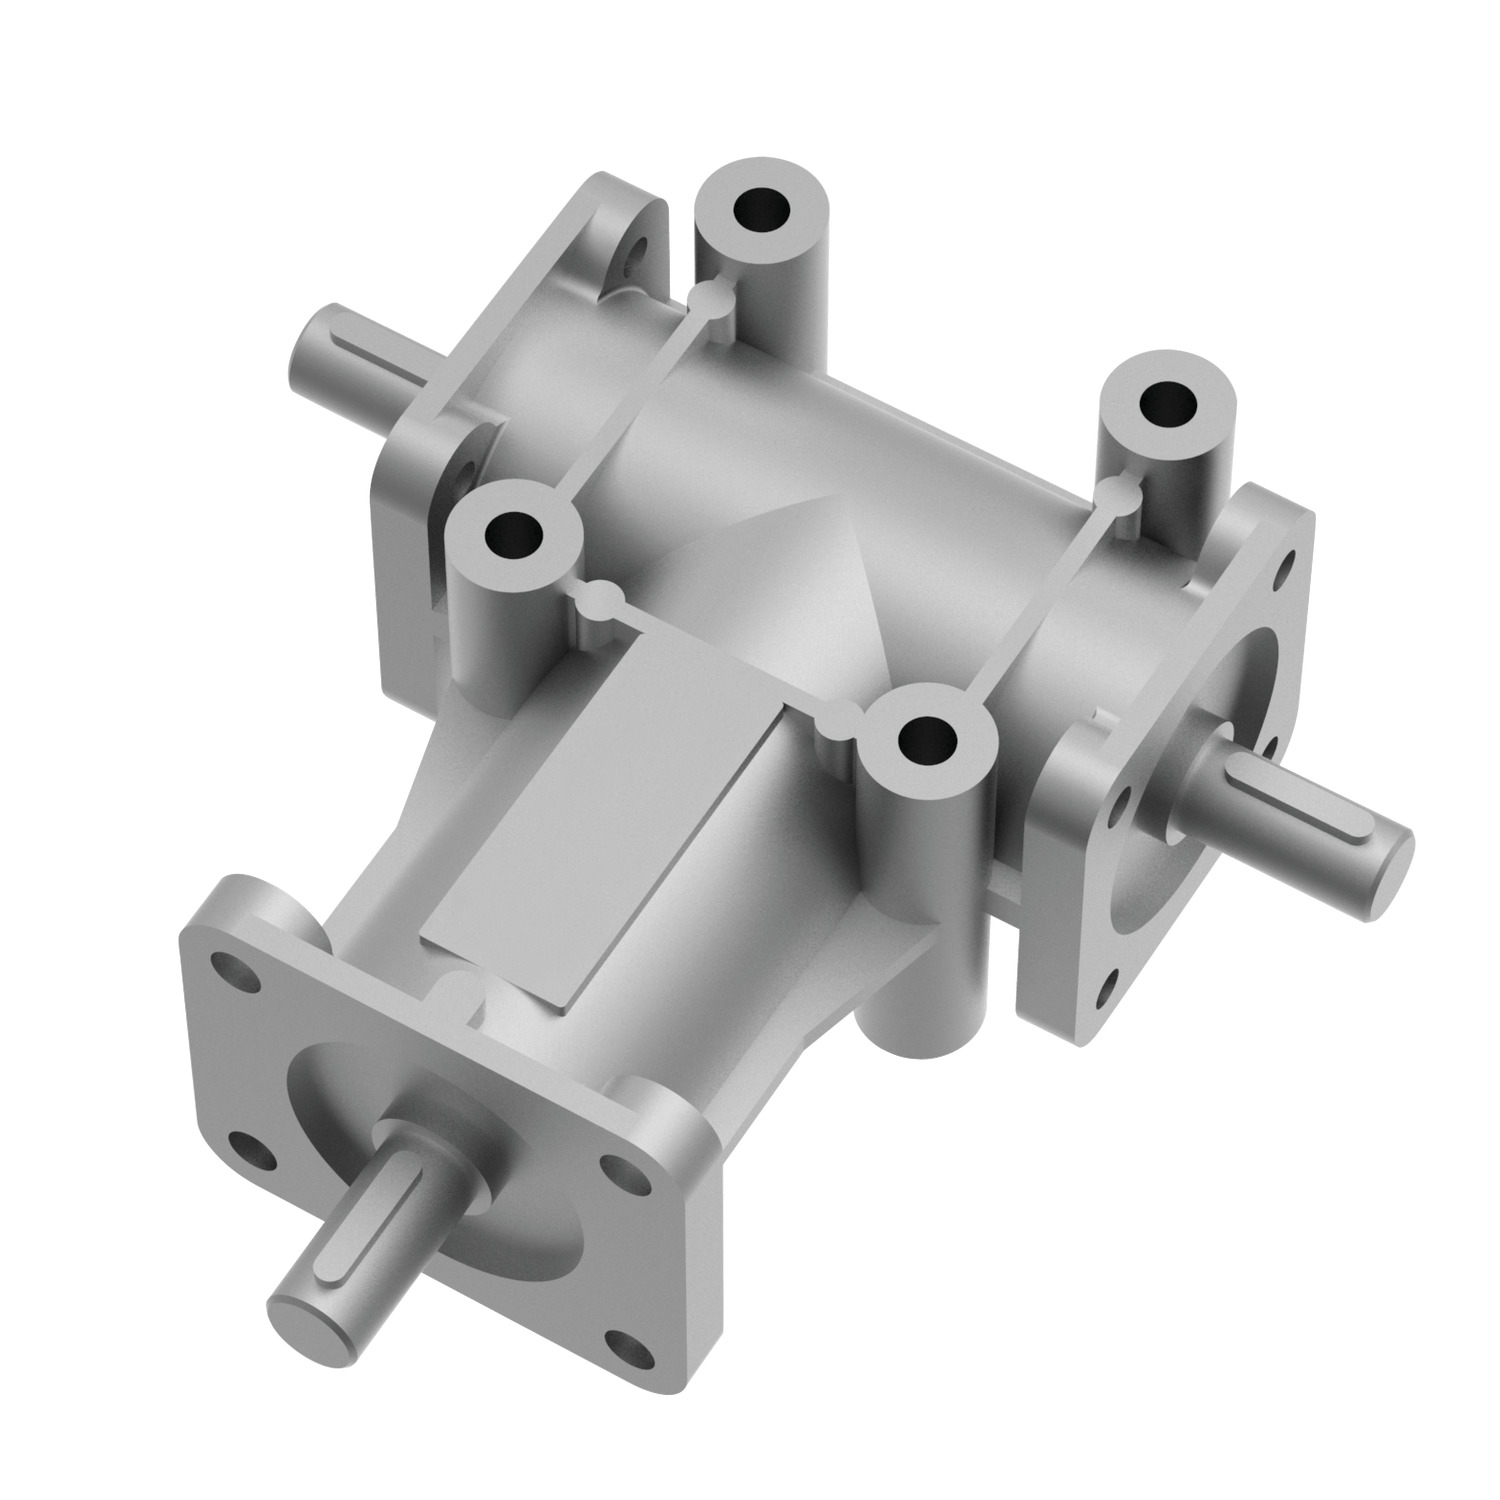 Three Shaft Gear Boxes Two shaft right angle gear boxes in sizes up to Ø24 shafts. Made from lightweight aluminium alloy housing with case-hardened steel gears and shafts.